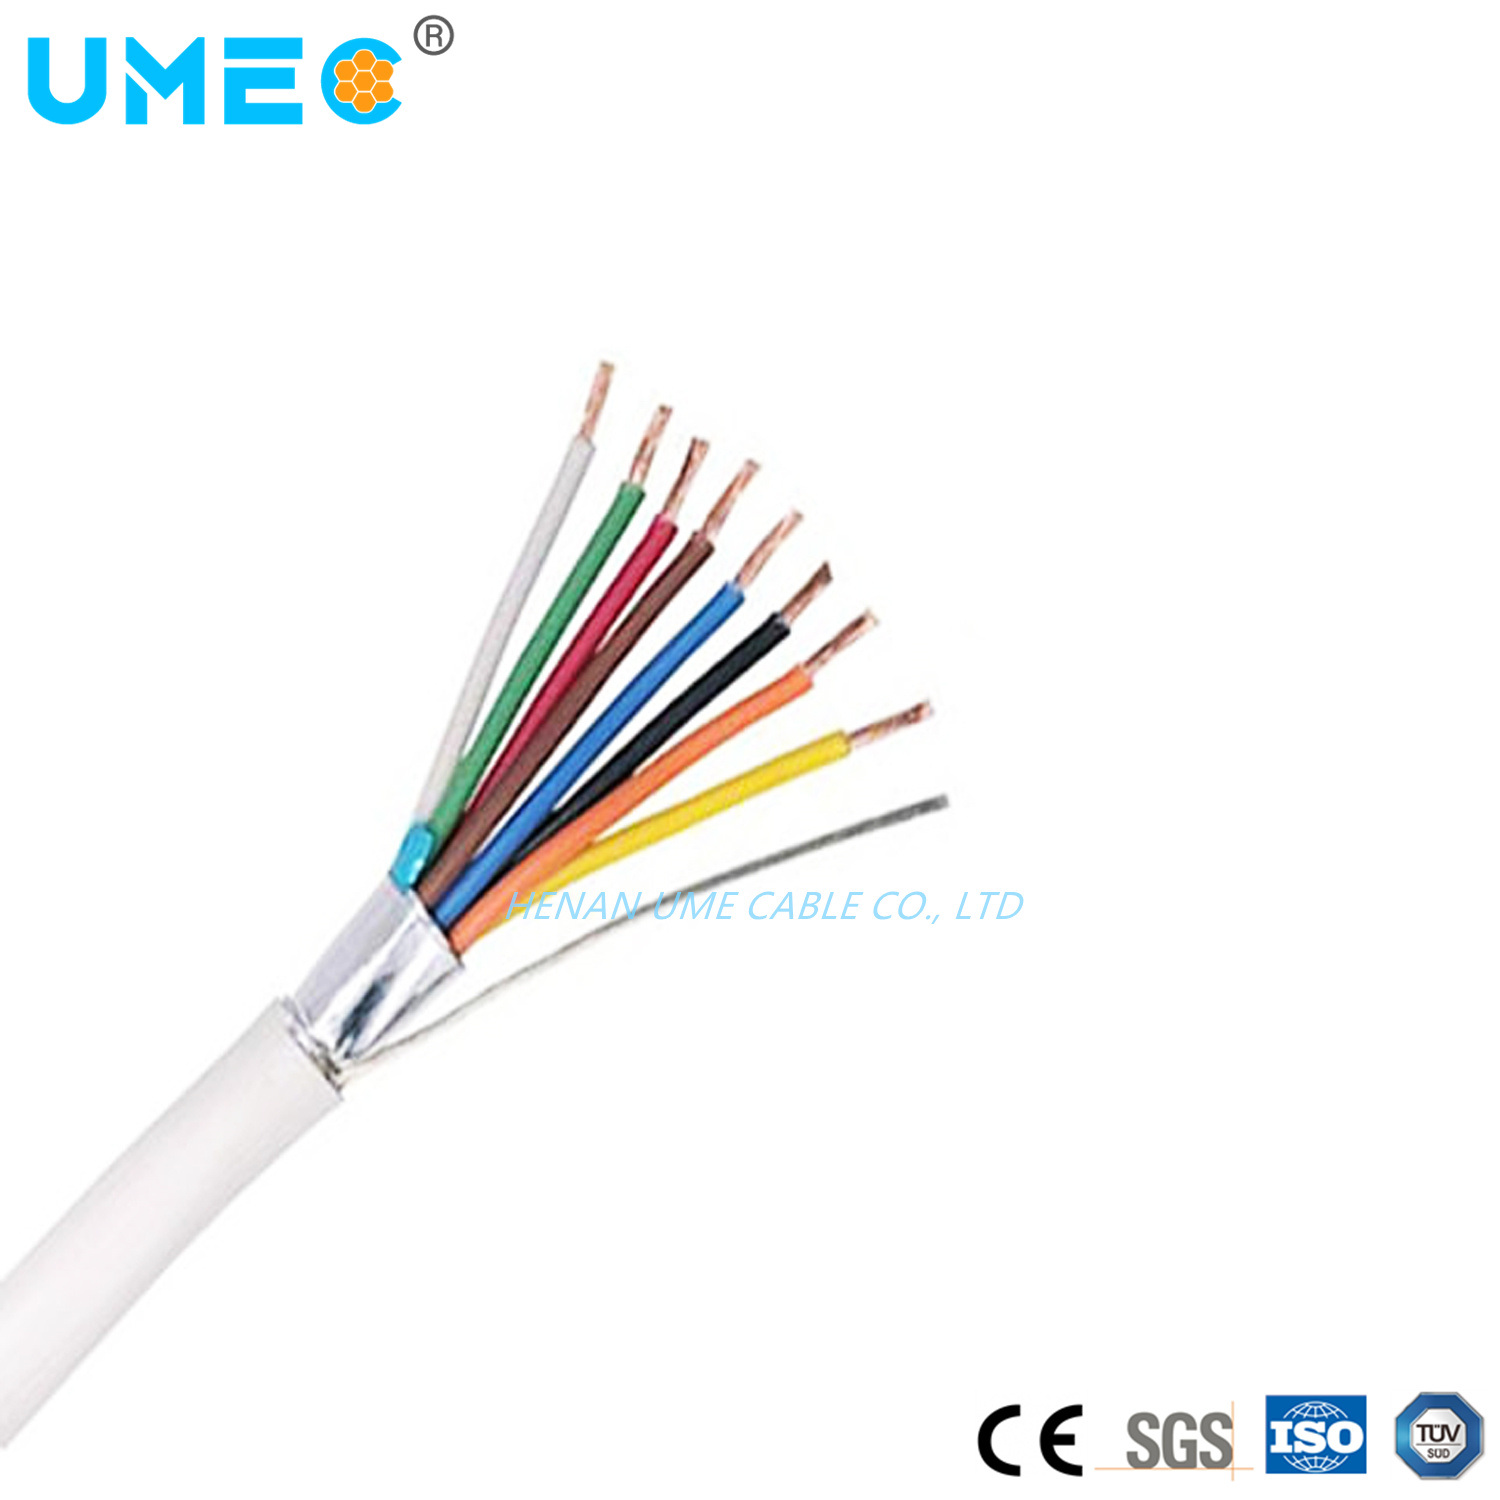 Control Soft Cable with Cu Core, PVC Insulation and Sheath